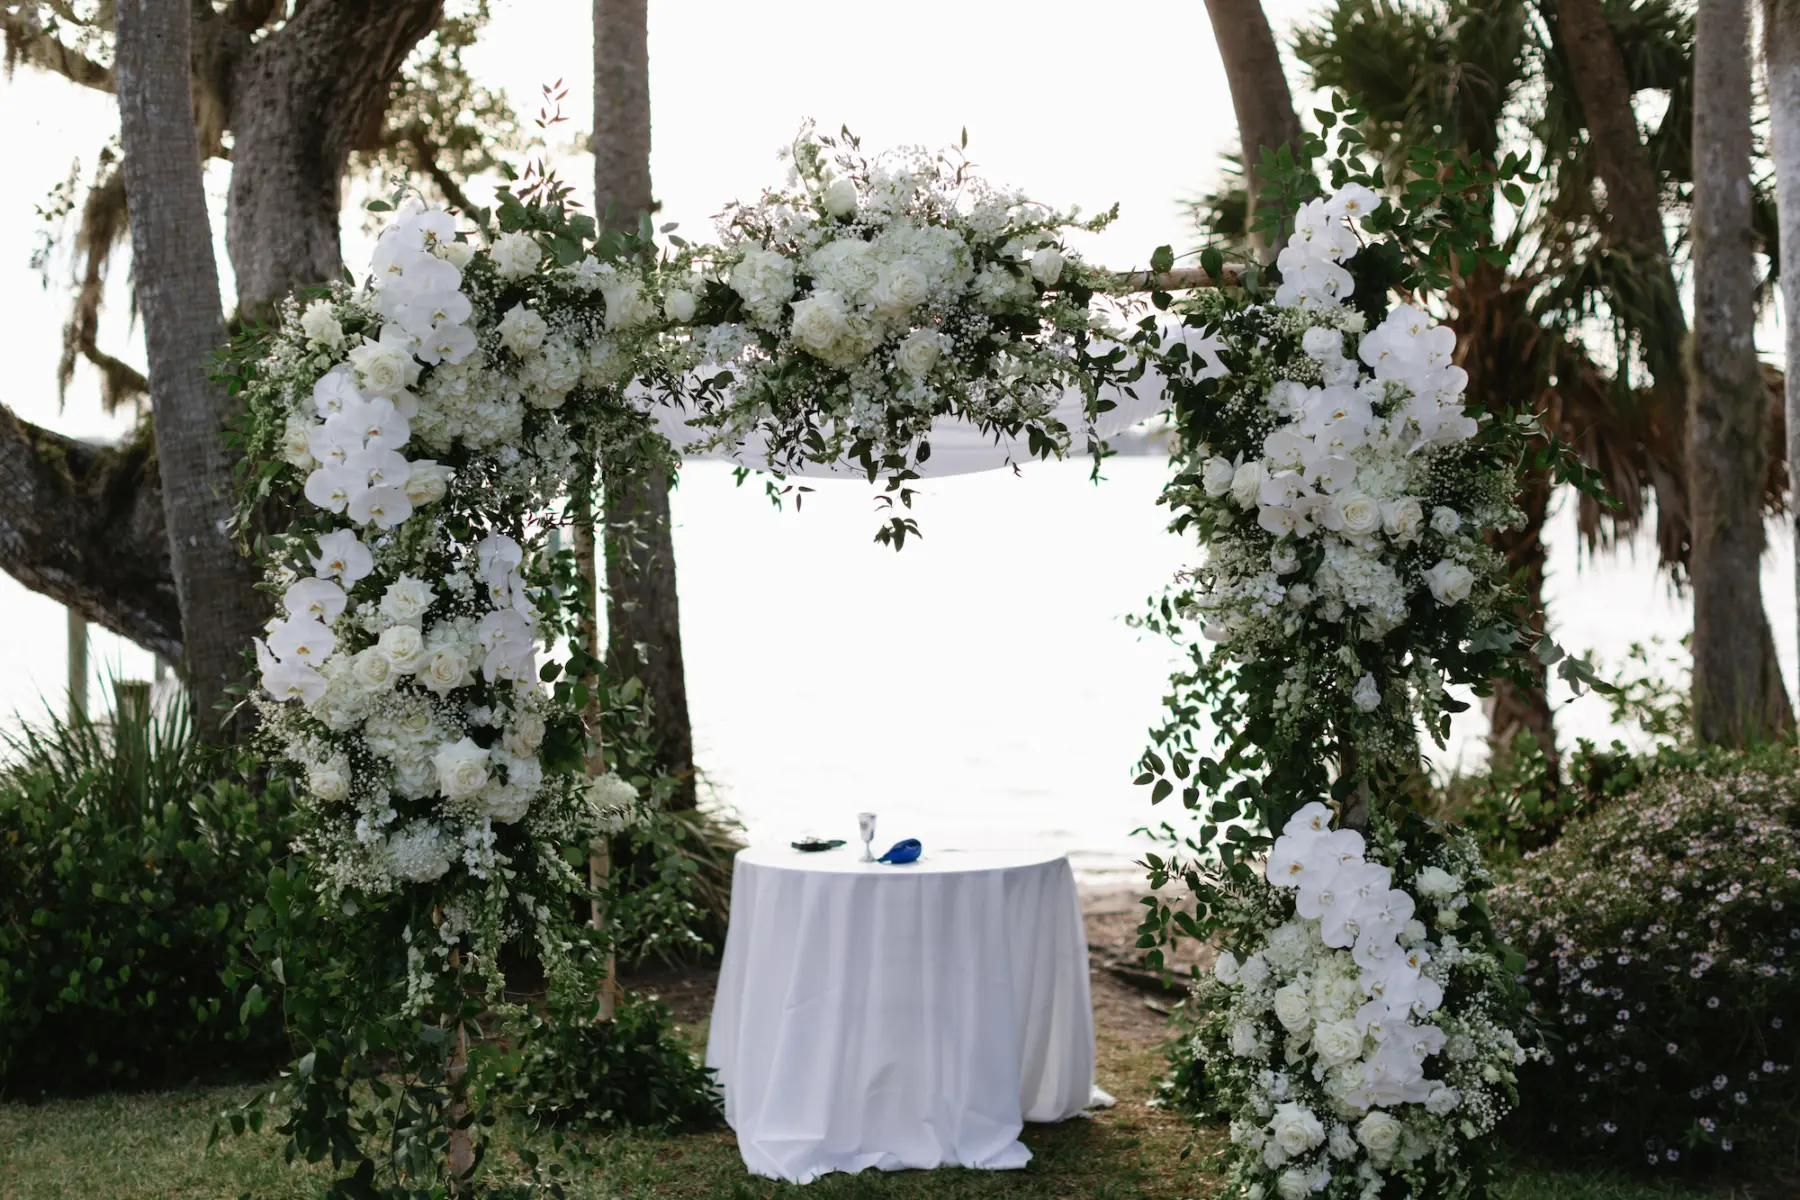 Classic White Wedding Ceremony Arch with White Roses, Orchids, Baby's Breath, Hydrangeas, and Greenery Decor Inspiration | Tampa Bay Florist Beneva Florals